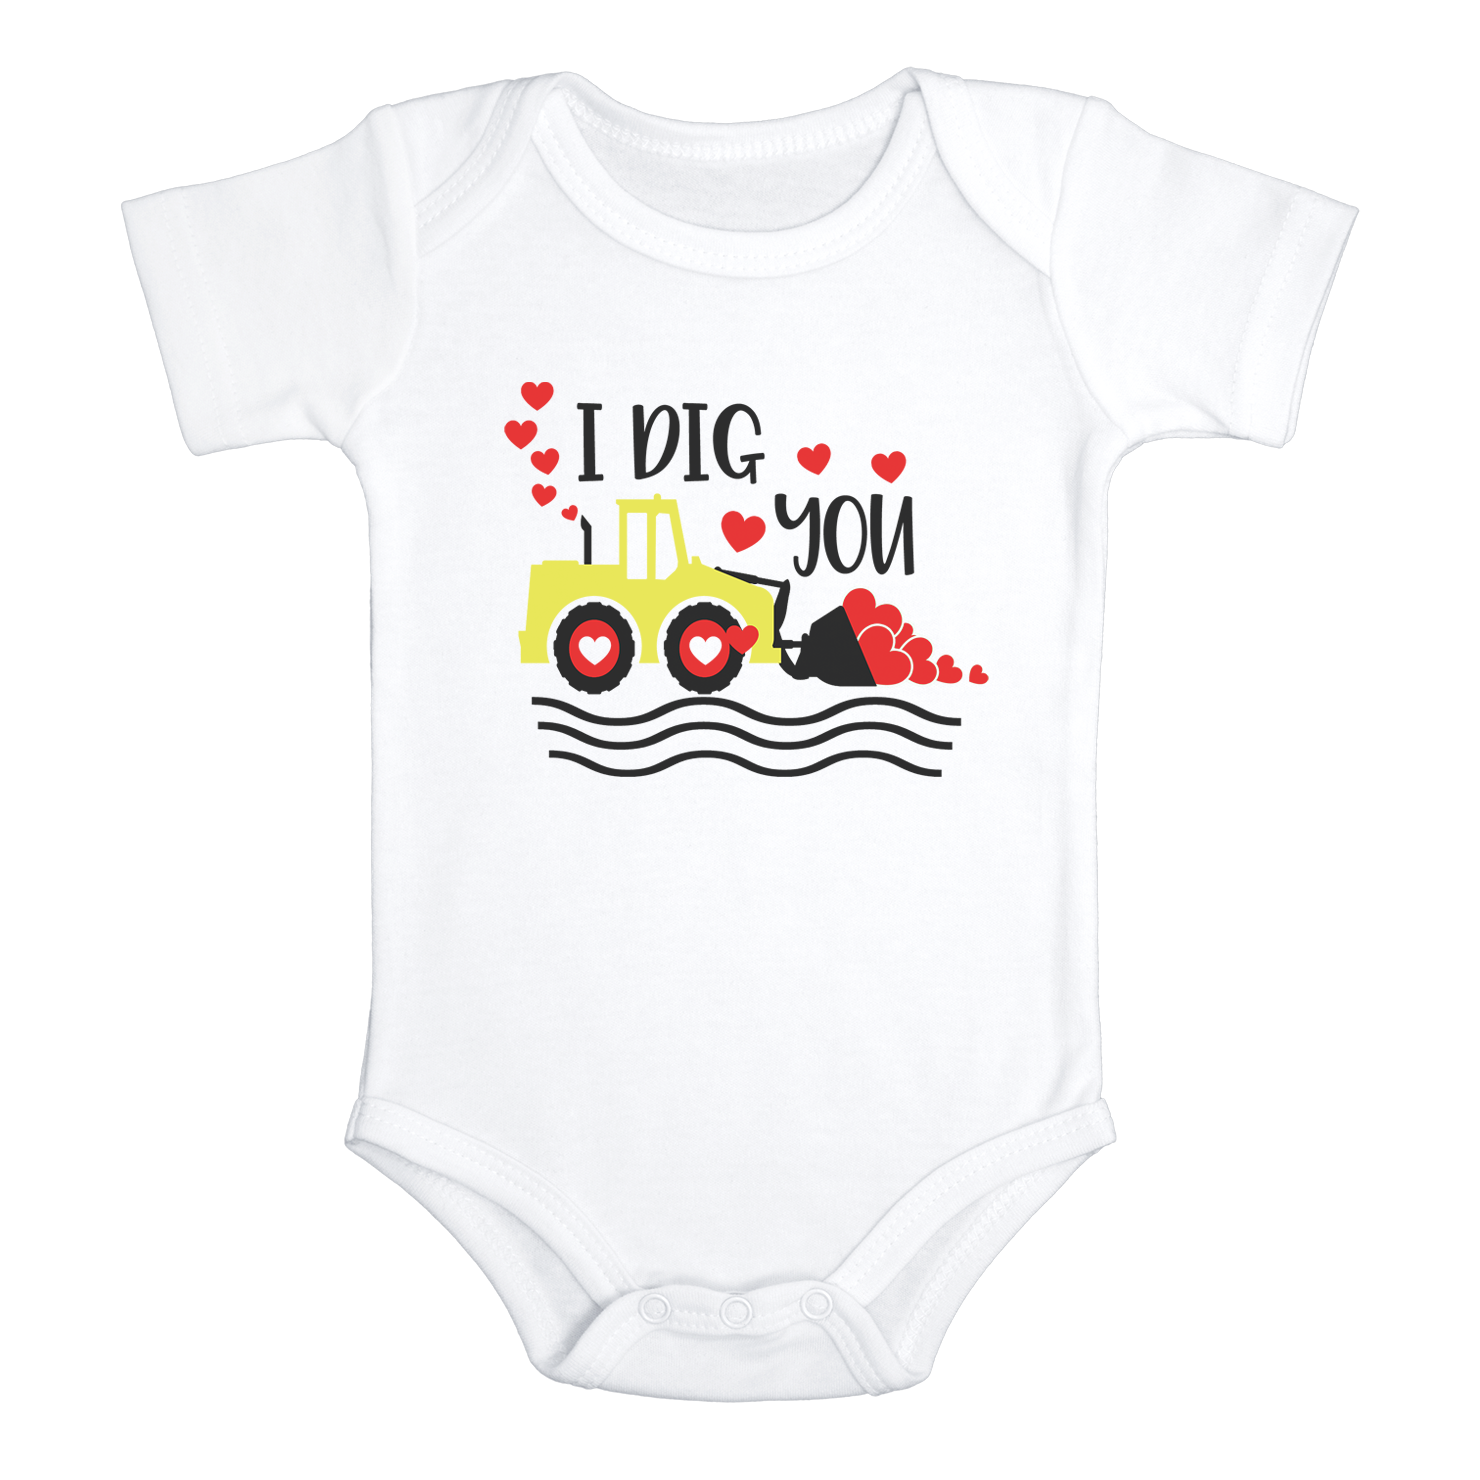 I DIG YOU funny baby onesies bodysuit (white: short or long sleeve) - HappyAddition